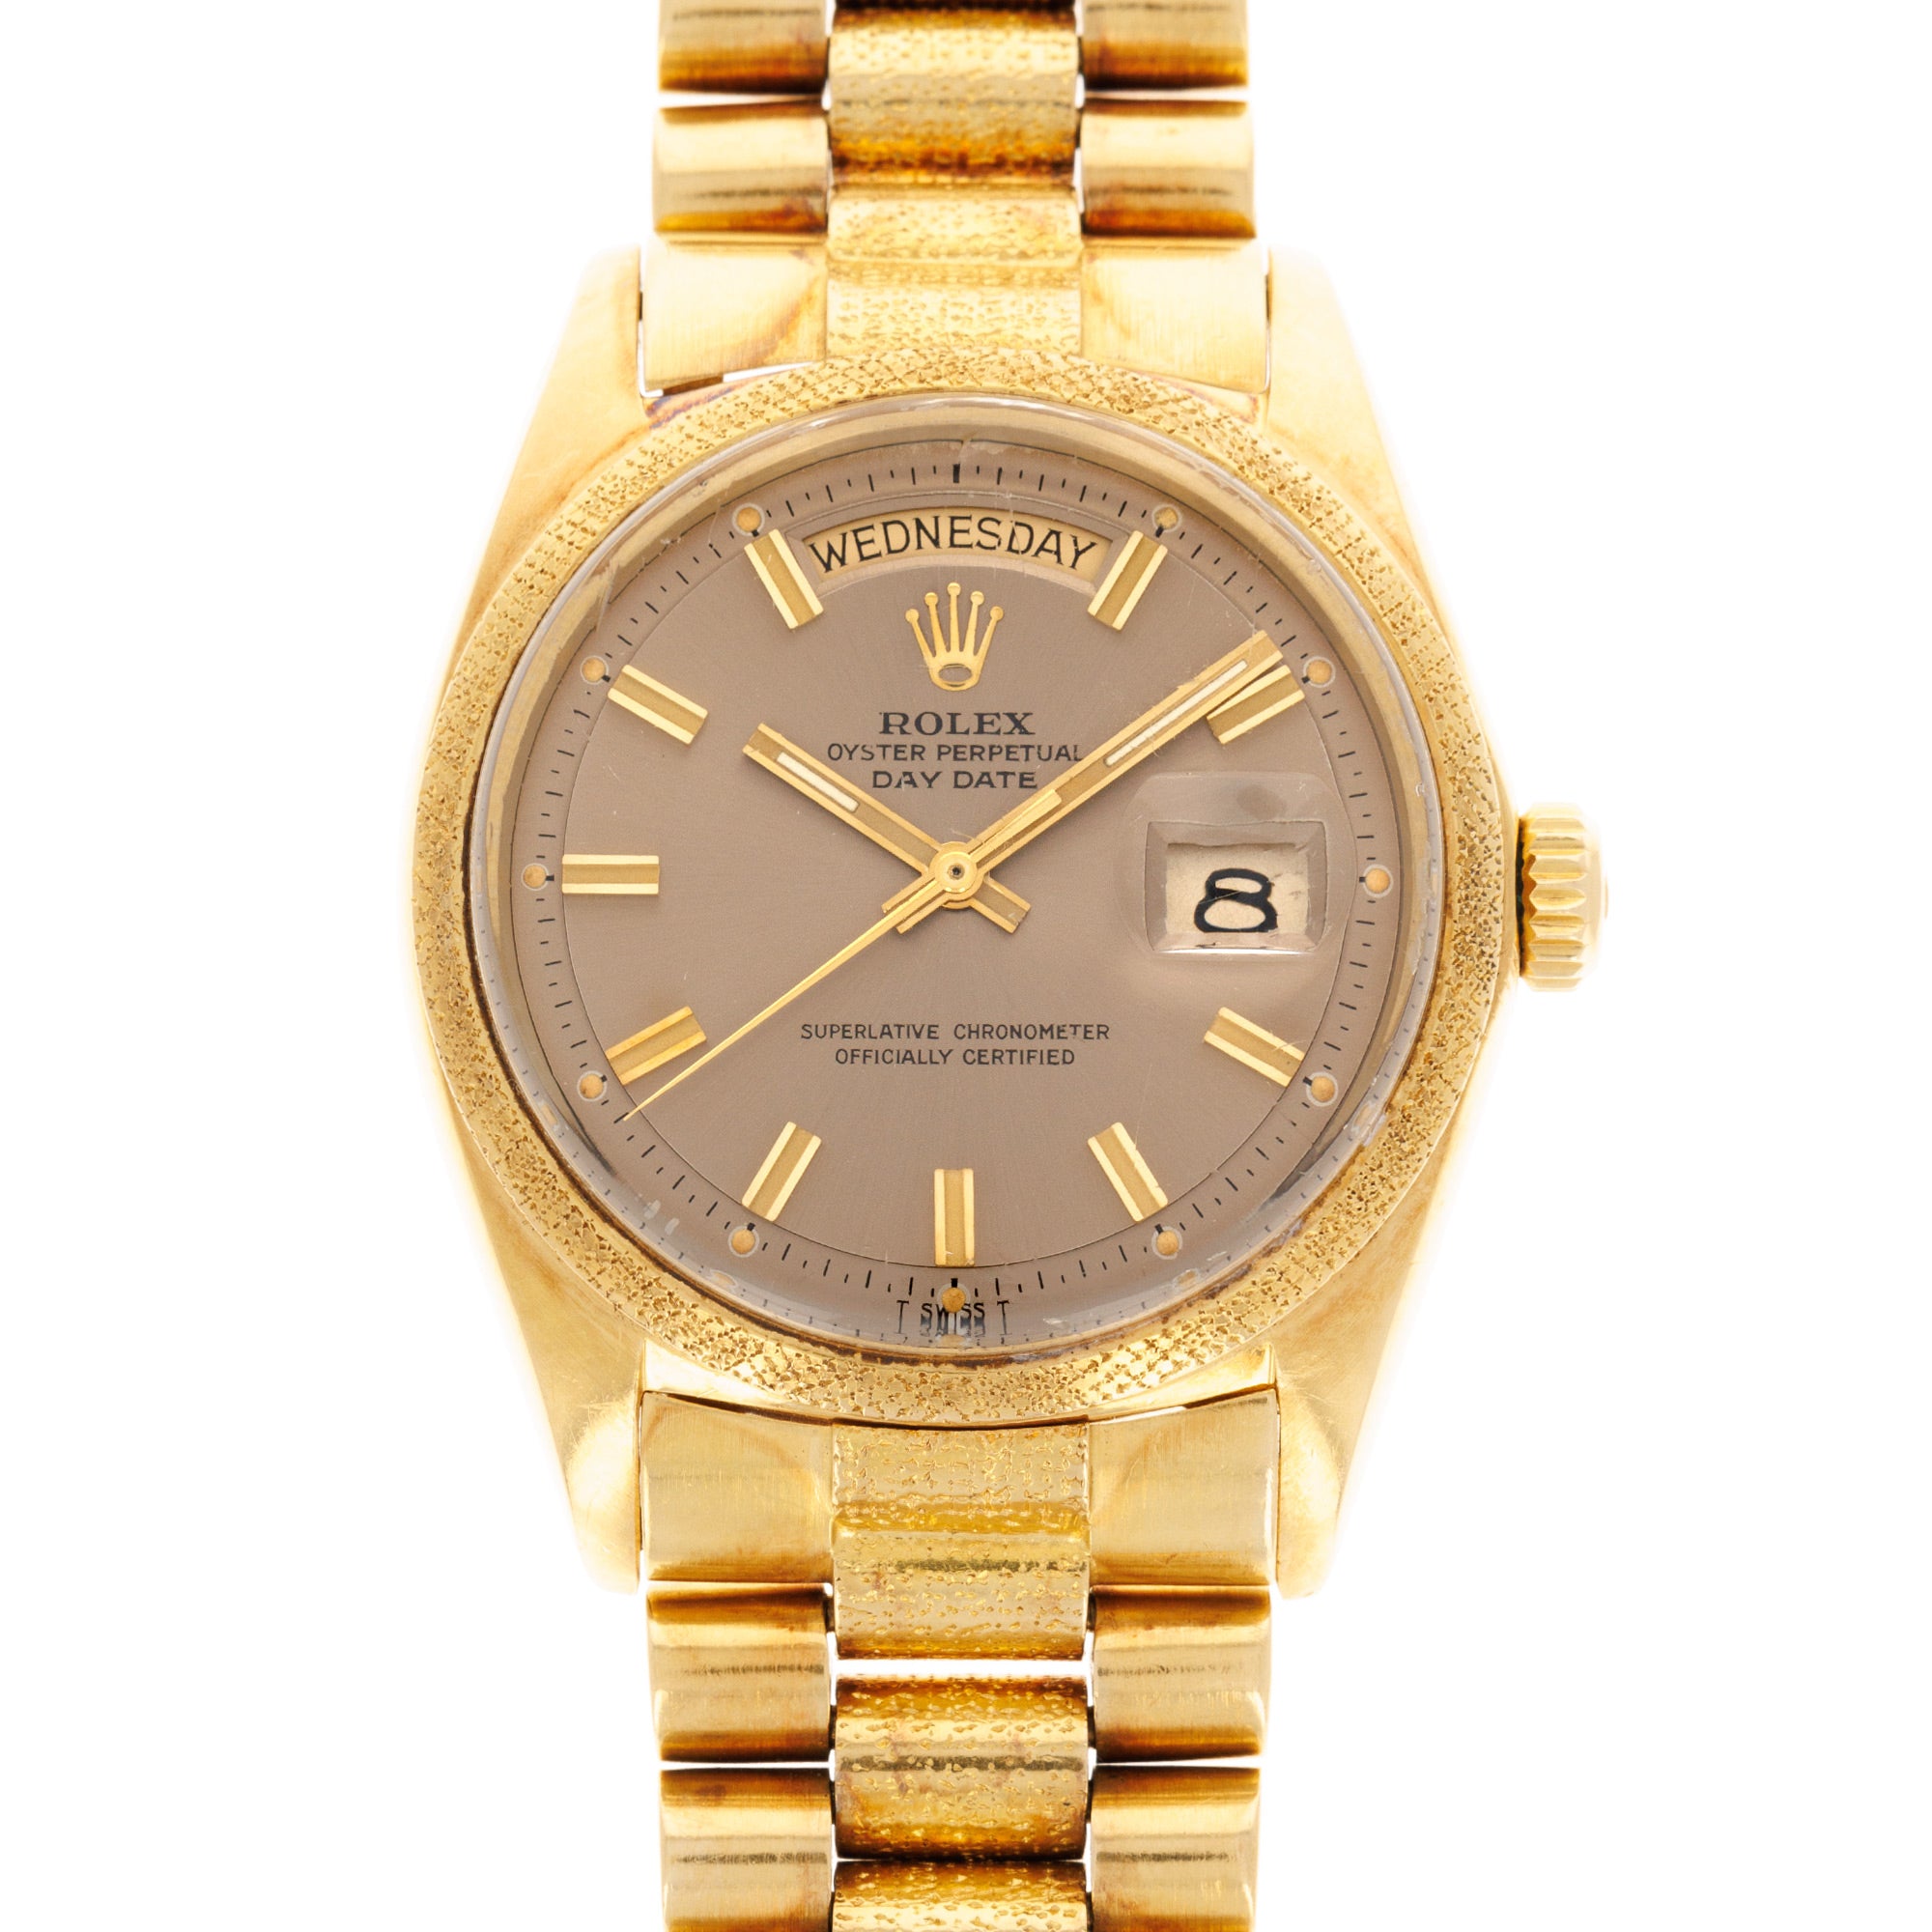 Rolex - Rolex Yellow Gold Day-Date with Morelli Finish Ref. 1811 - The Keystone Watches